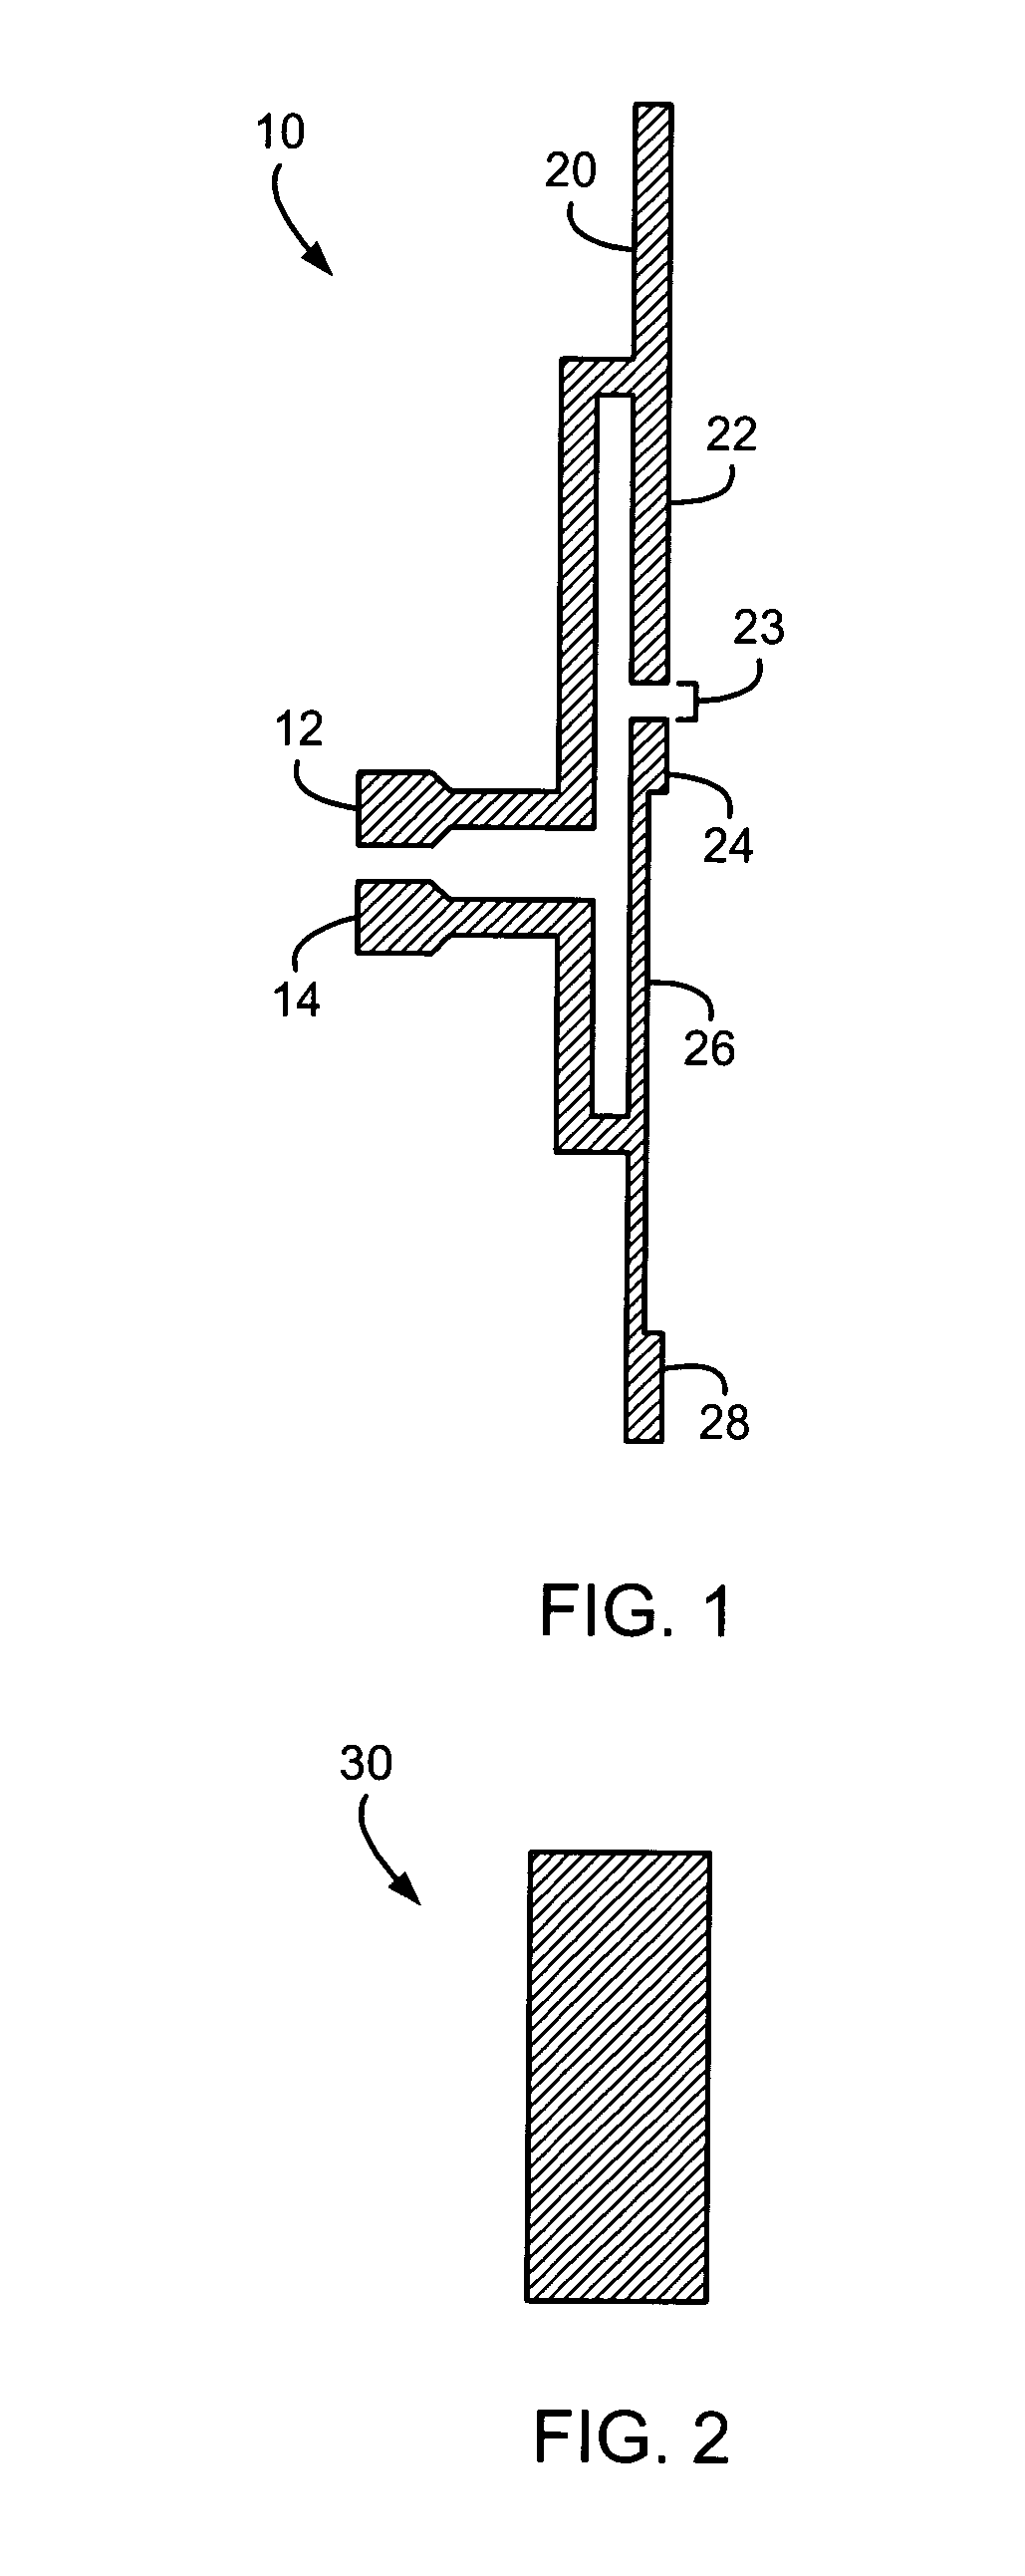 Floating conductor pad for antenna performance stabilization and noise reduction